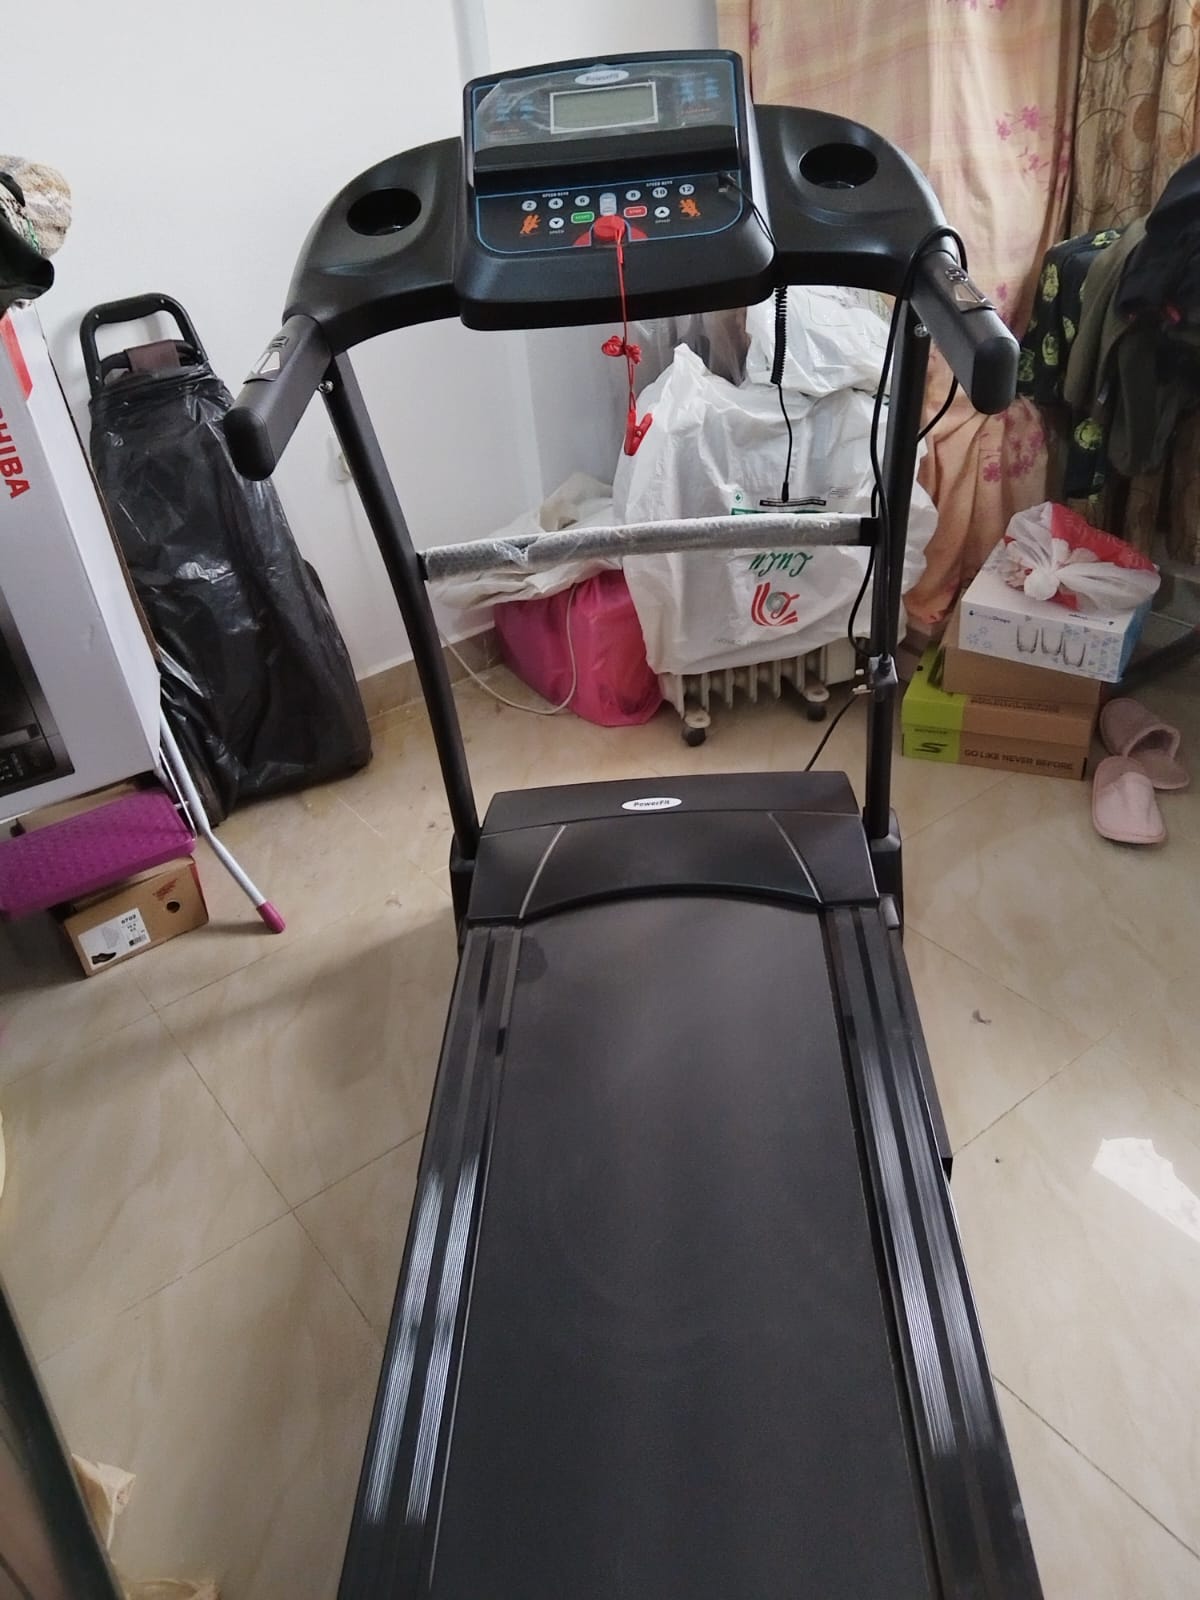 Rarely used Powerfit Treadmill for sale